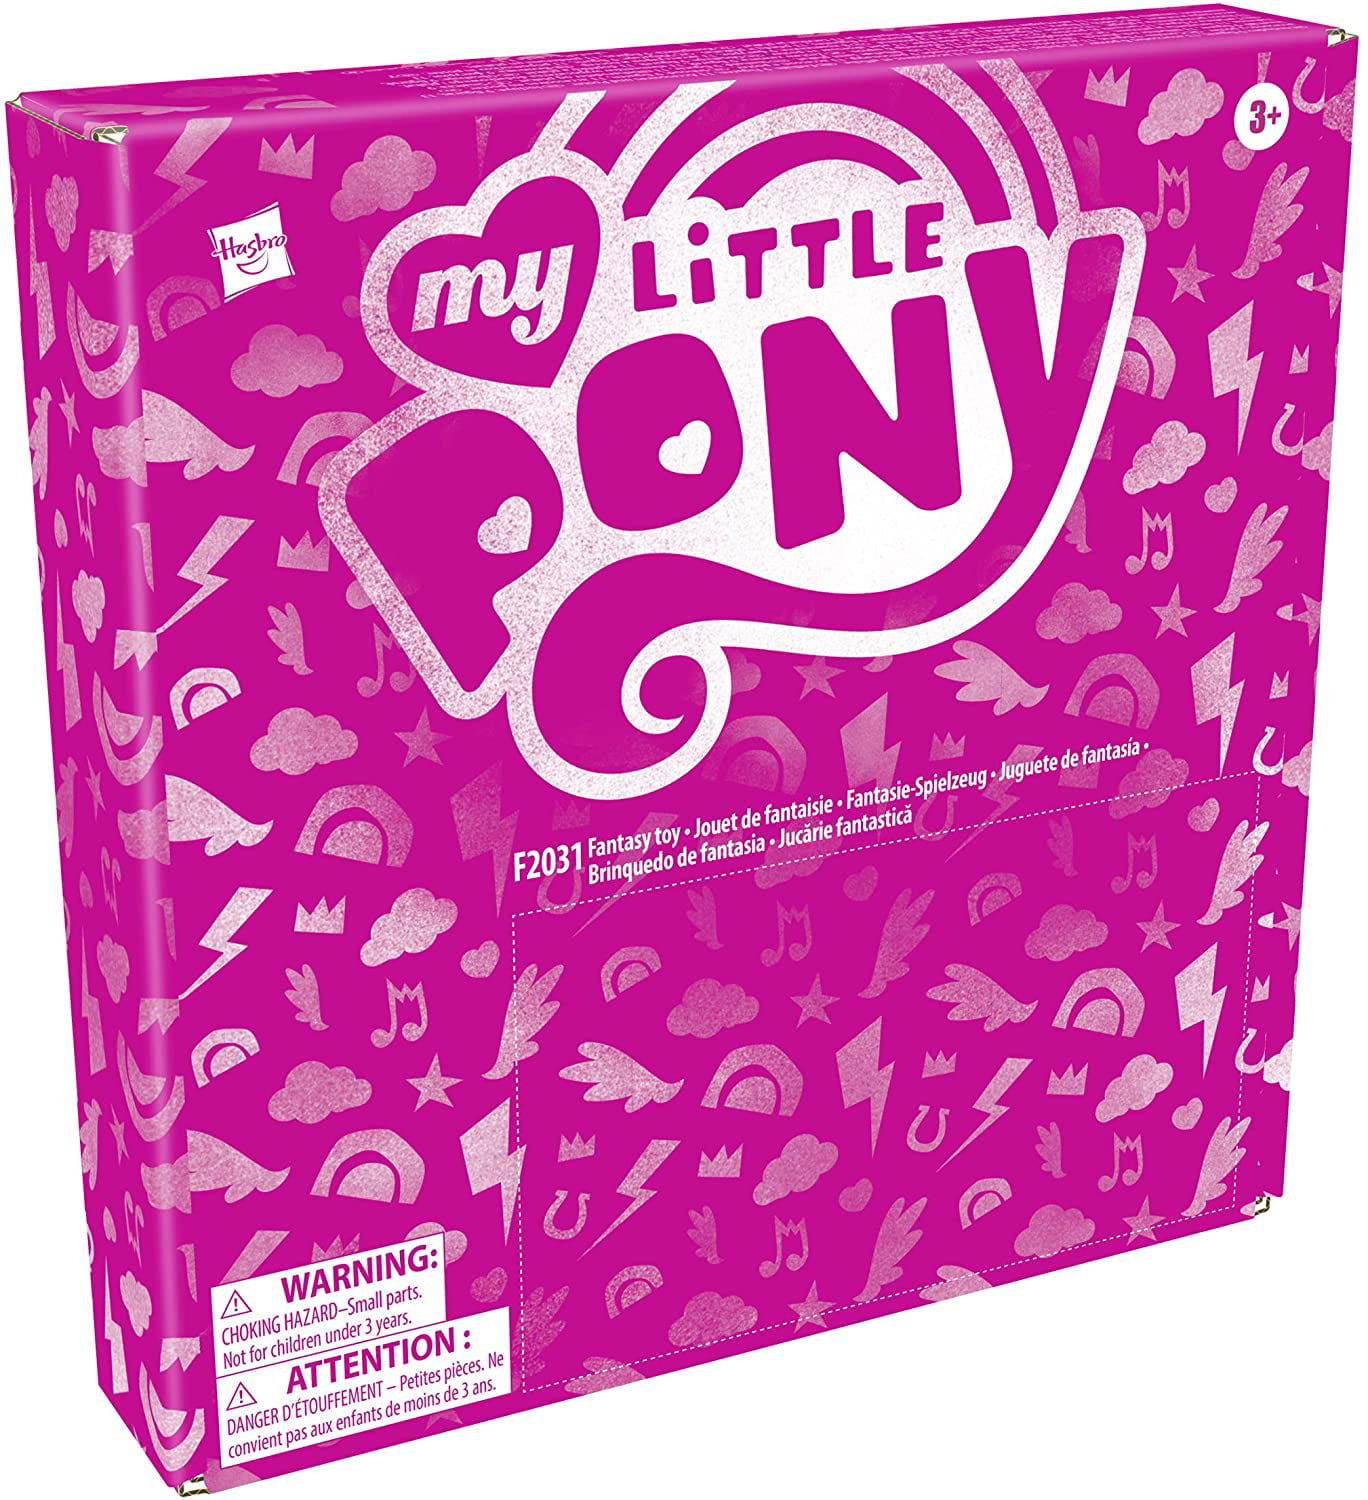  My Little Pony: A New Generation Movie Royal Gala Collection  Toy for Kids - 9 Pony Figures, 13 Accessories, Poster ( Exclusive) :  Toys & Games